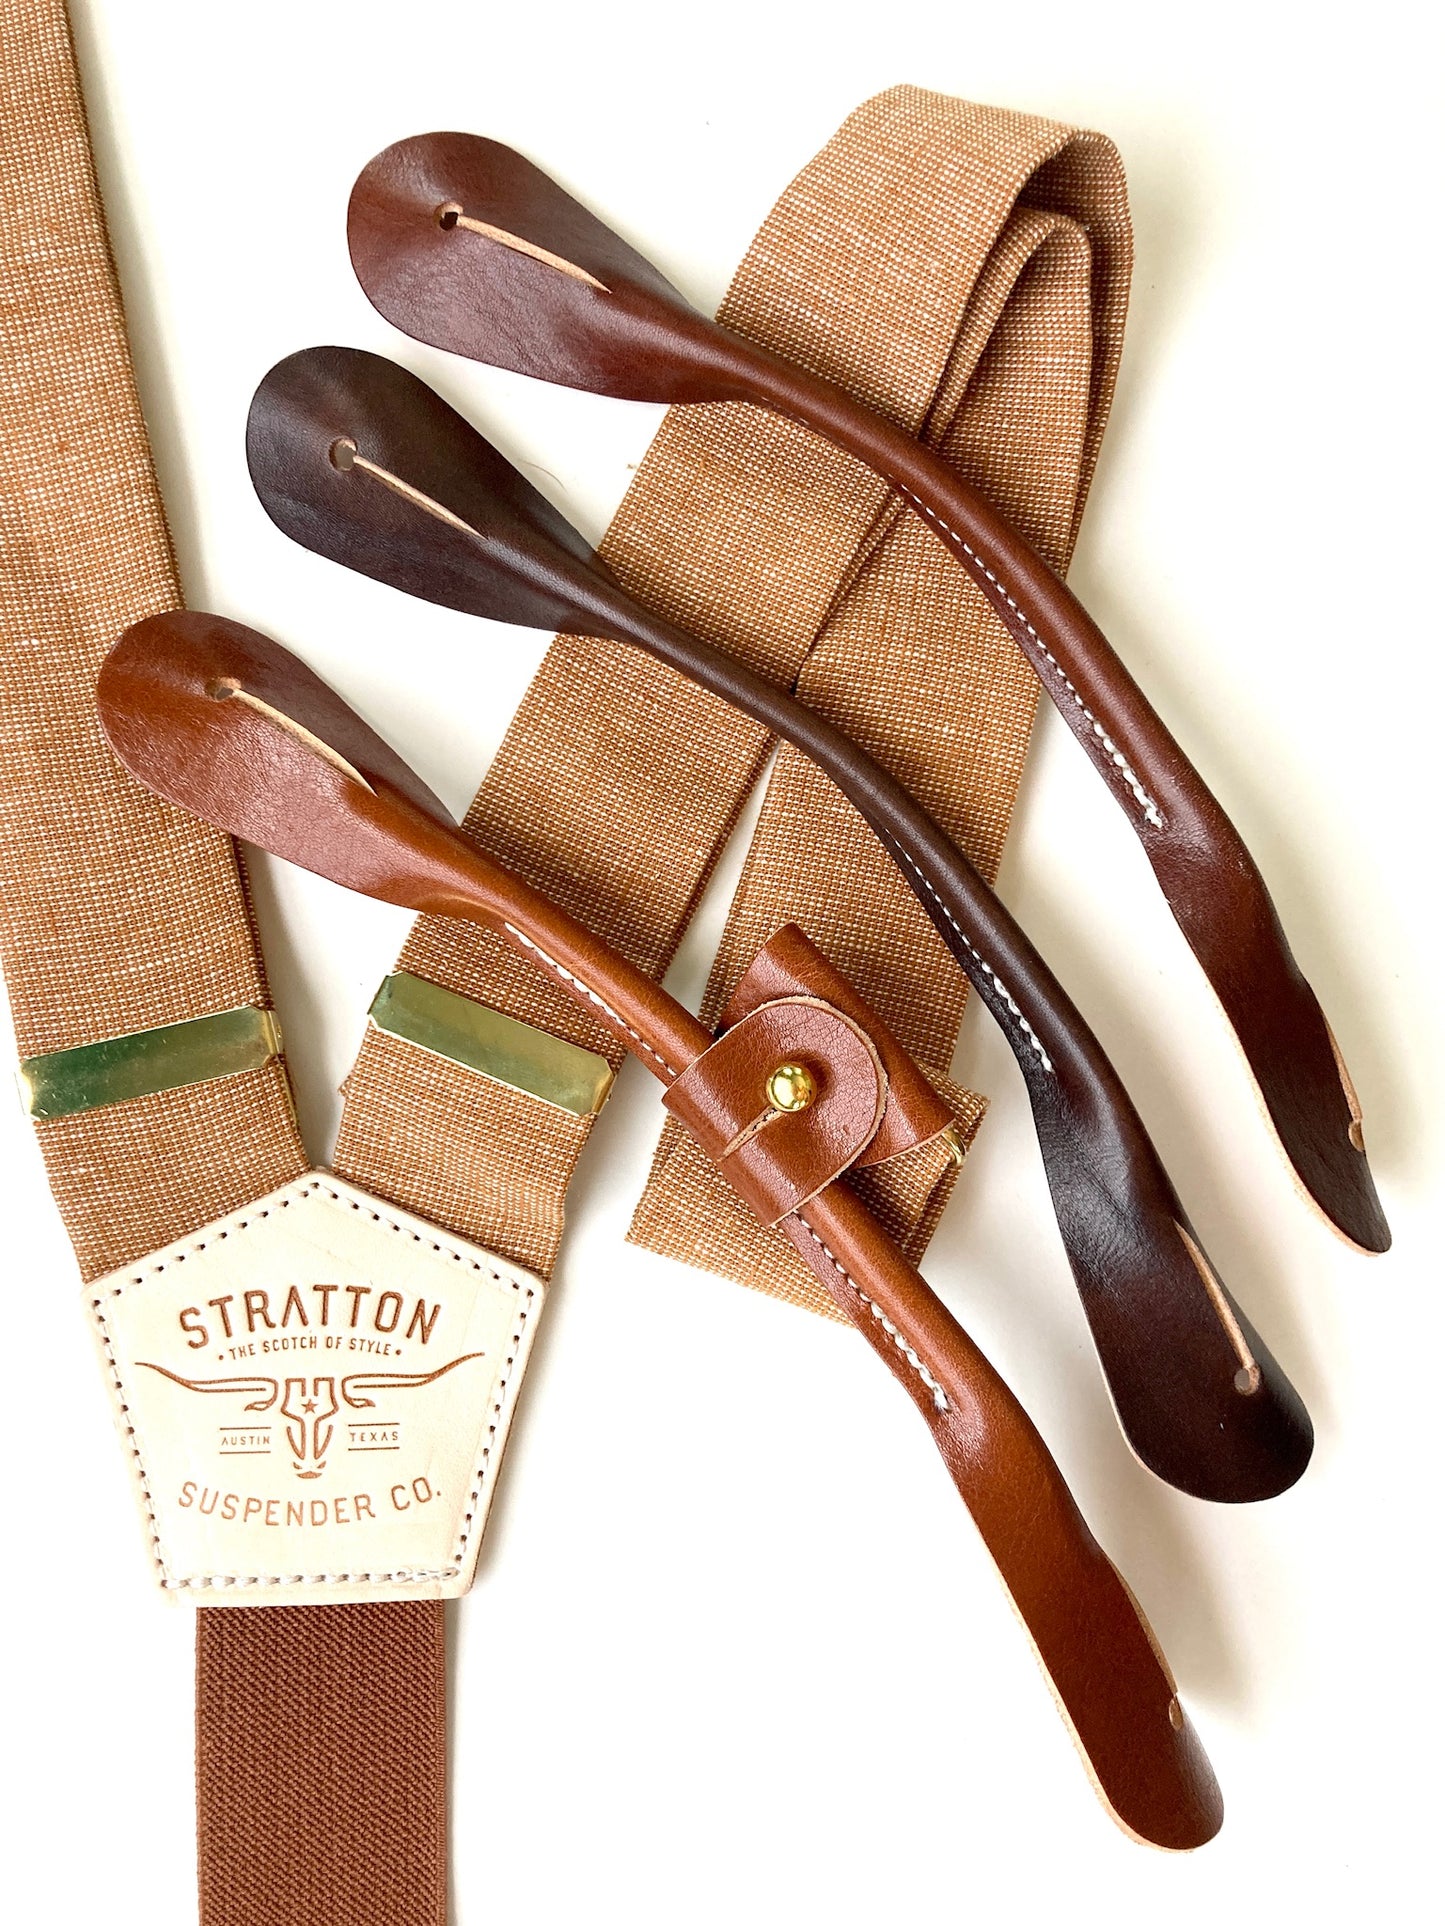 Special Edition Monochromatic Roasted Pecan Button-On Suspenders - Stratton Suspender Co. 2023 Edition